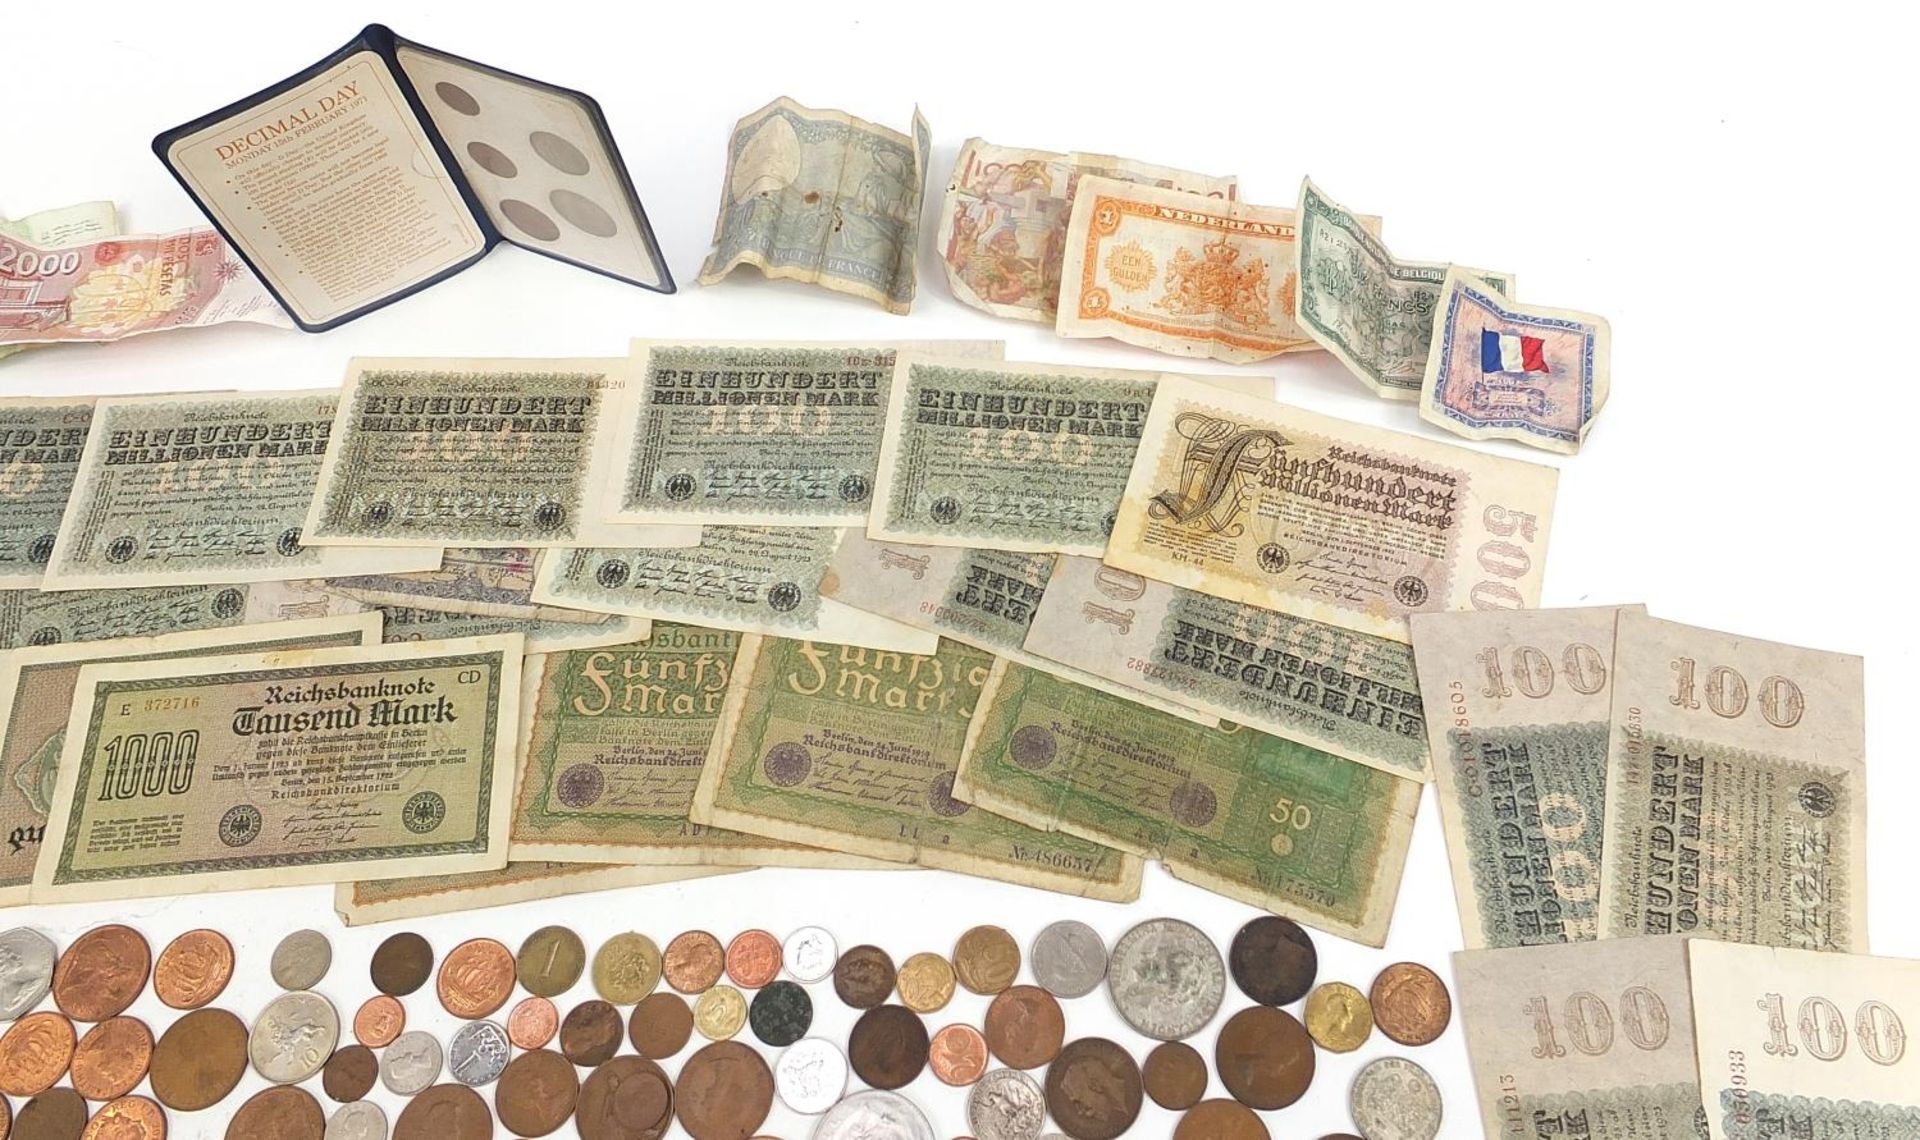 Antique and later British and world coinage and banknotes including Queen Victoria 1893 silver crown - Image 4 of 6